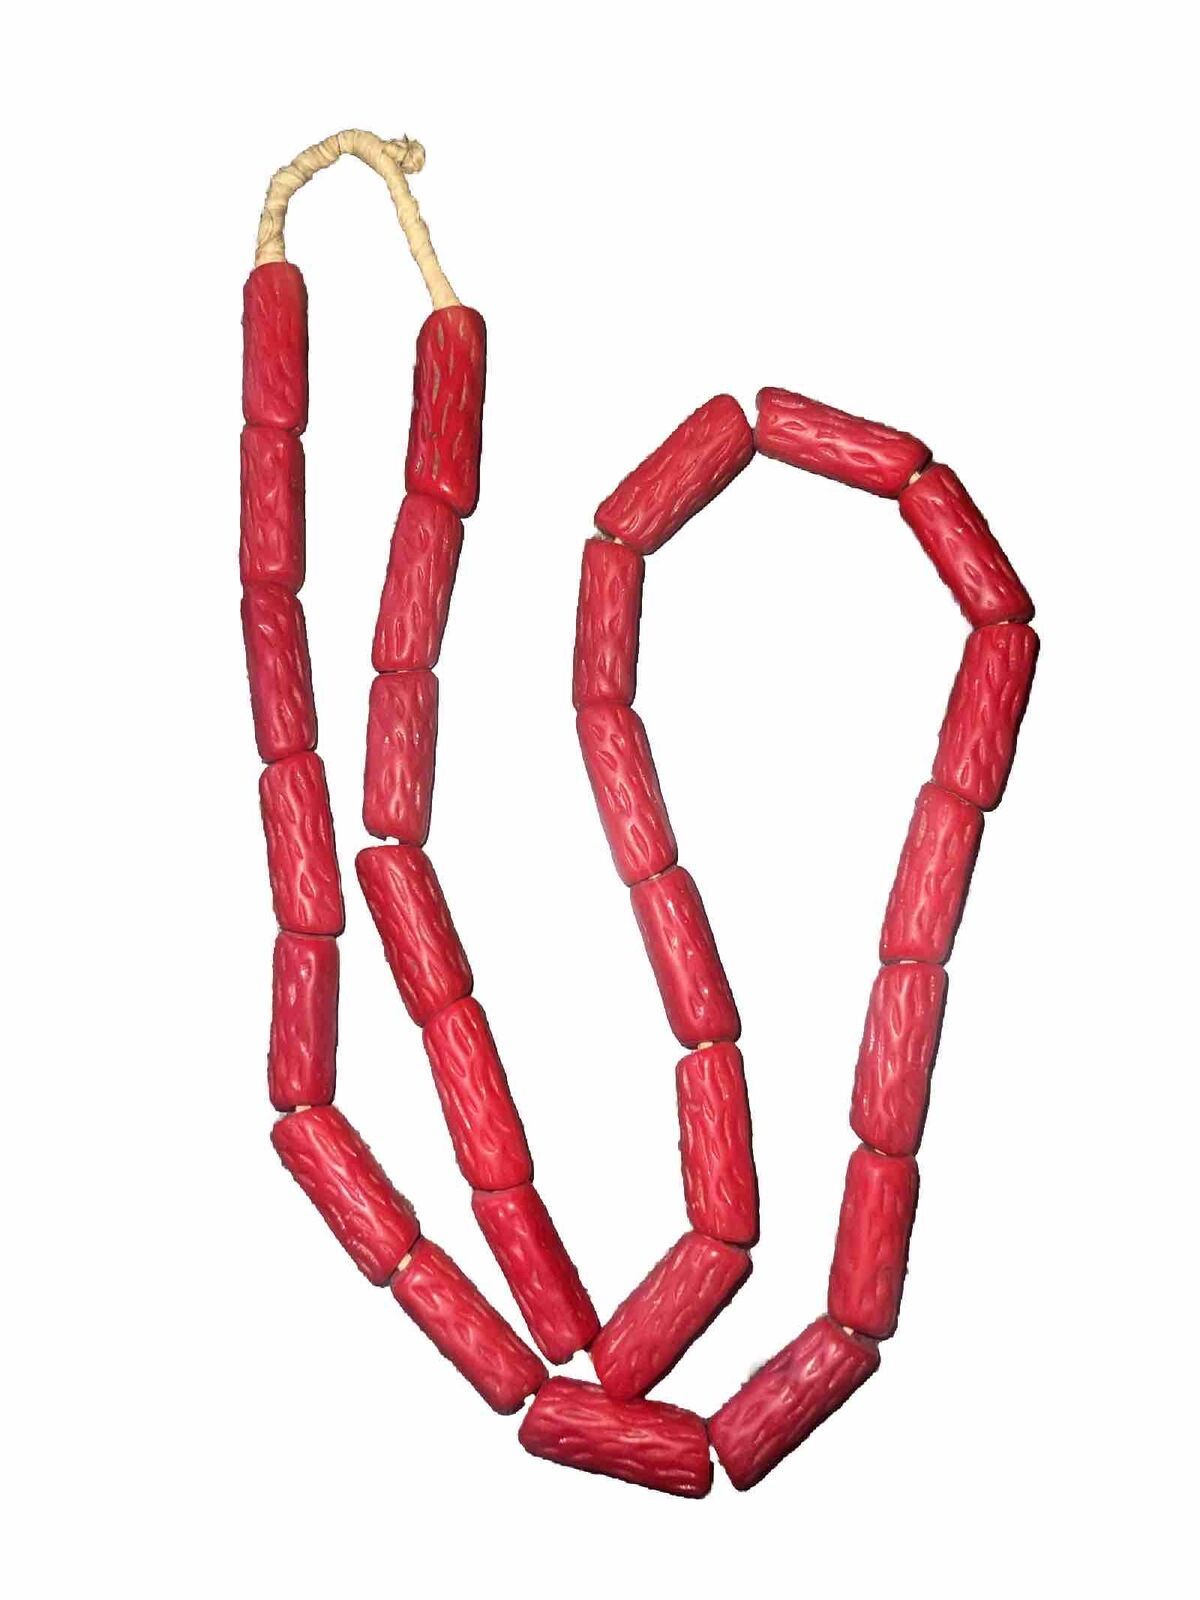 Fine Vintage Czech Bohemian Glass Coral Red African Trade beads